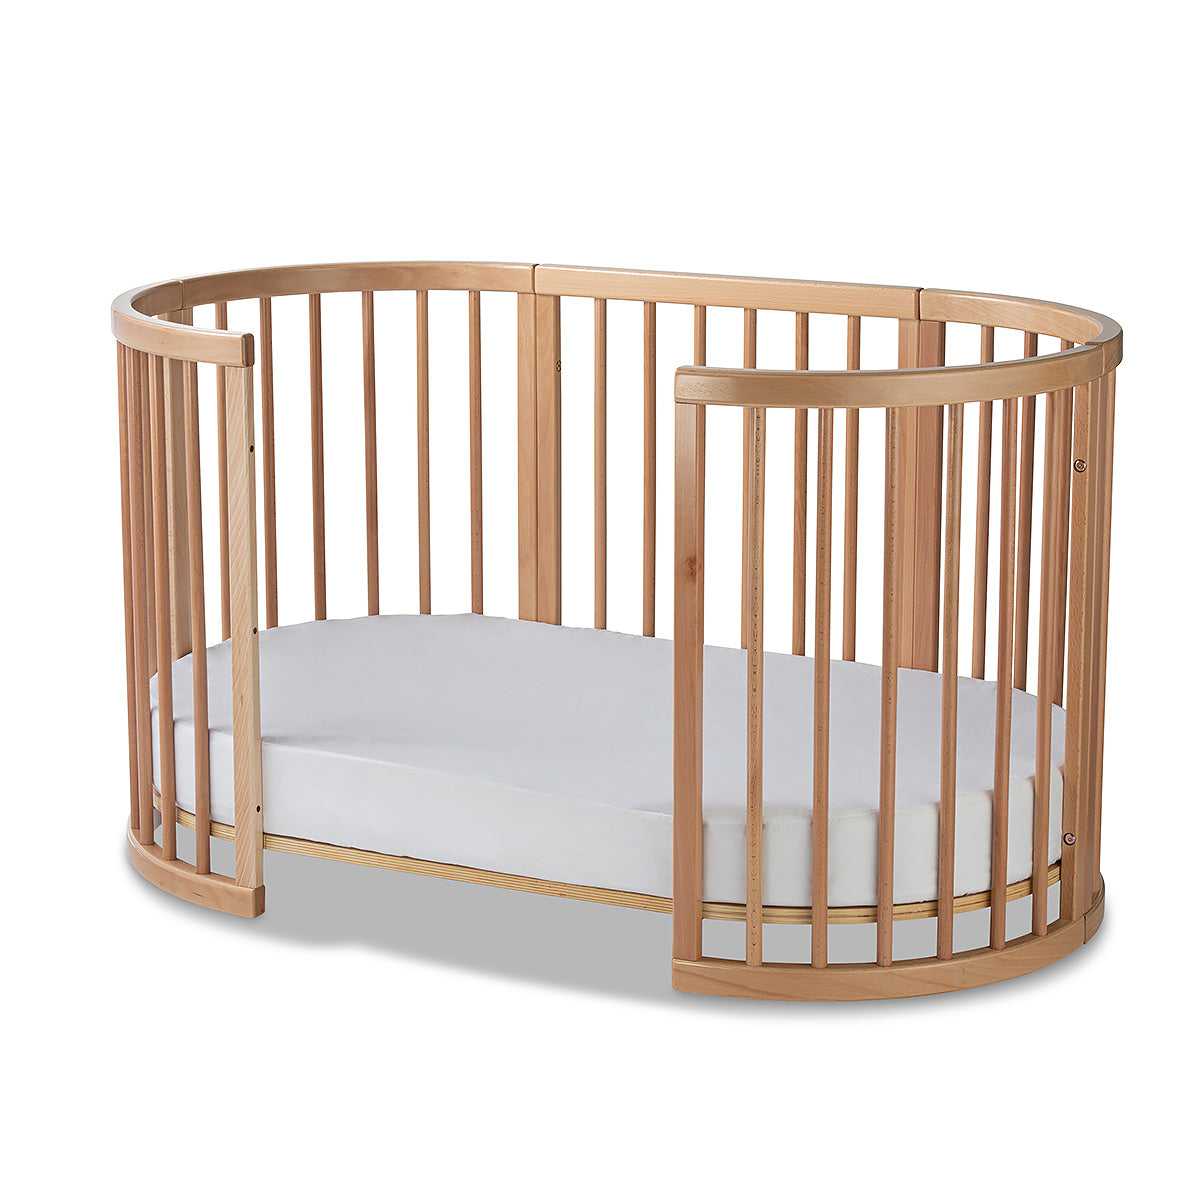 Lolli Sprout Cot 4 in 1 Natural with Mattress